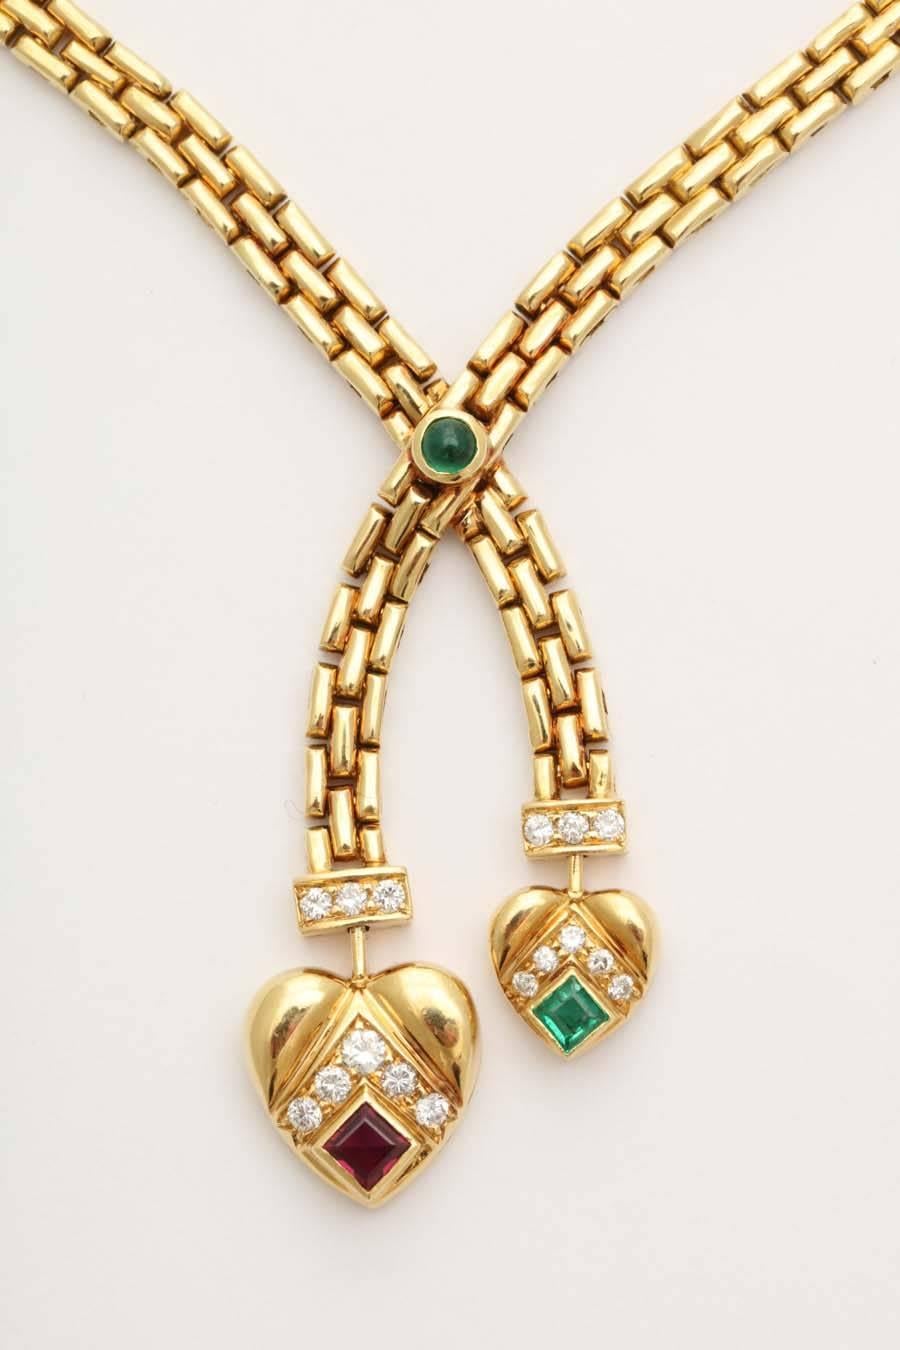 A Classic stylized beautifully articulated 18-karat gold necklace of flat Greek key design with asymmetrical hearts with a combination of small square diamonds, square ruby and a square emerald with a cabochon emerald accent. The necklace is signed